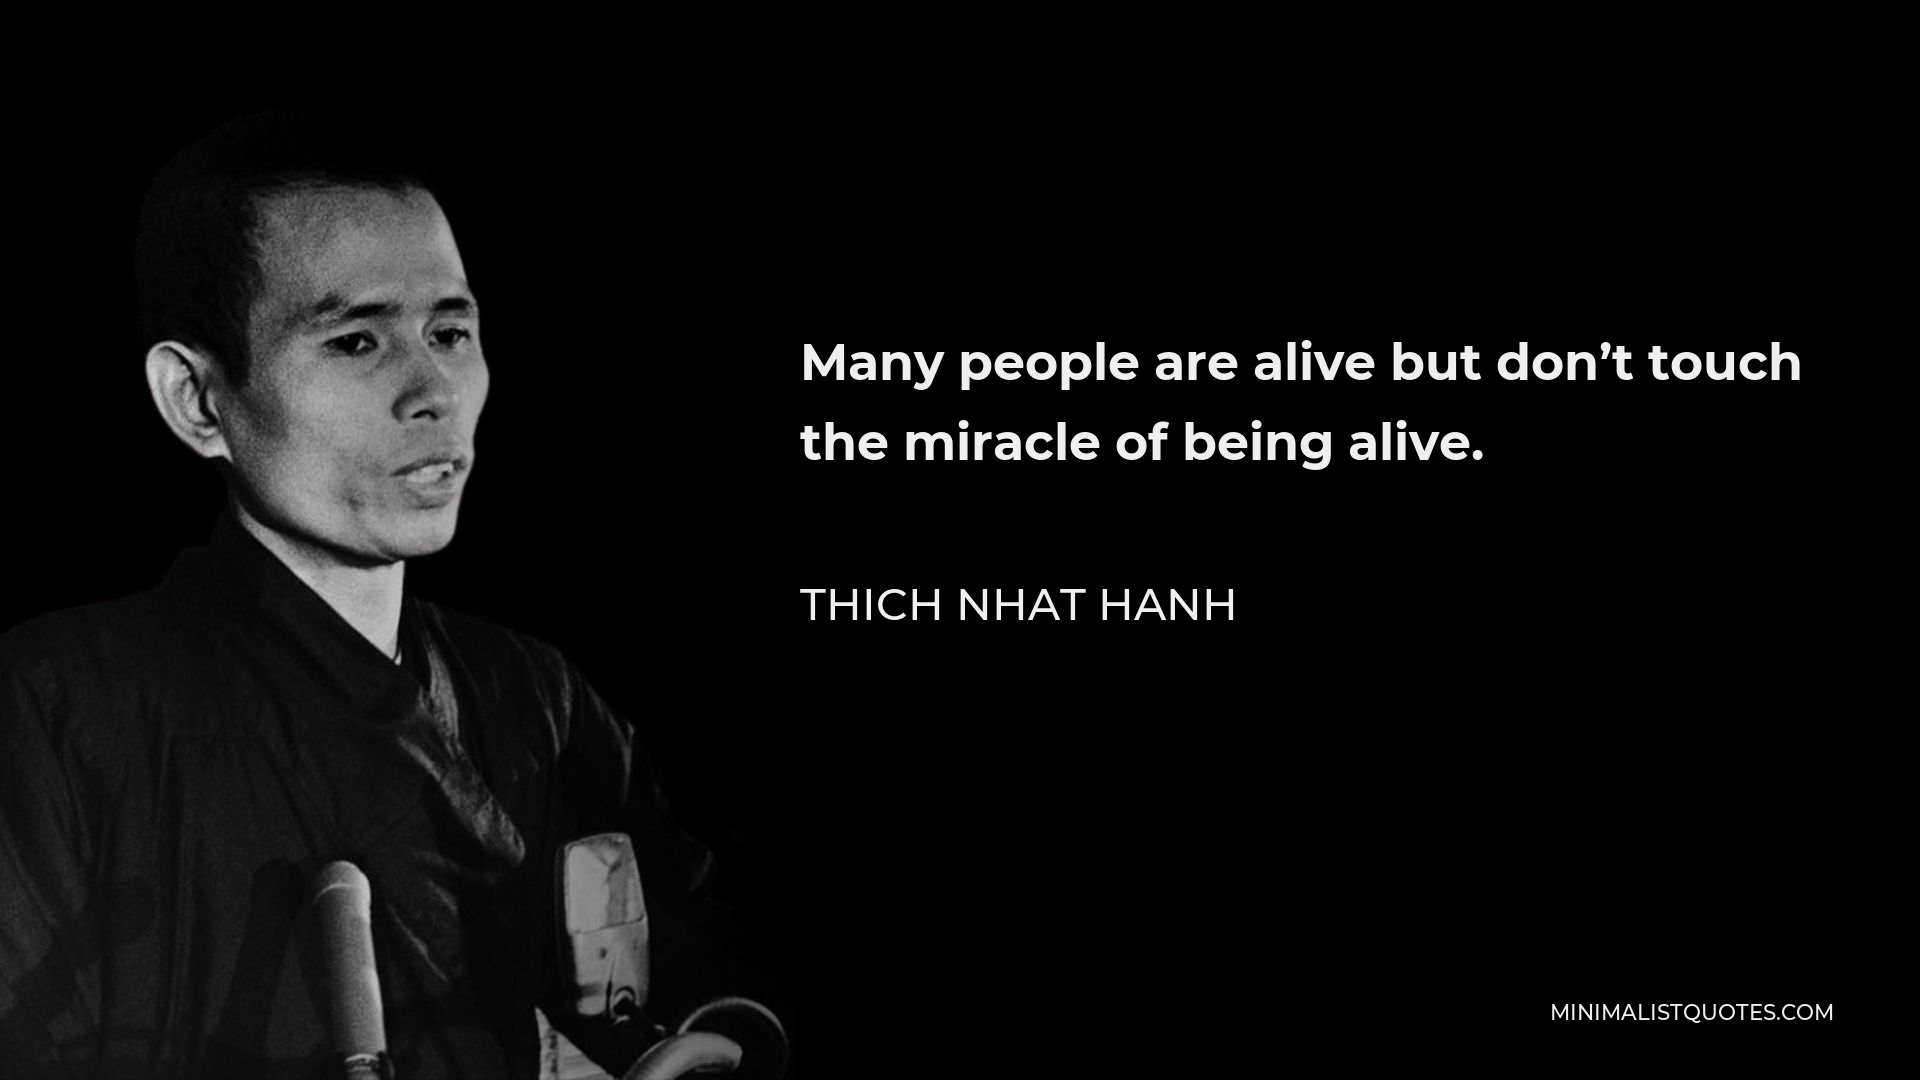 Thich Nhat Hanh Quote - Many people are alive but don’t touch the miracle of being alive.